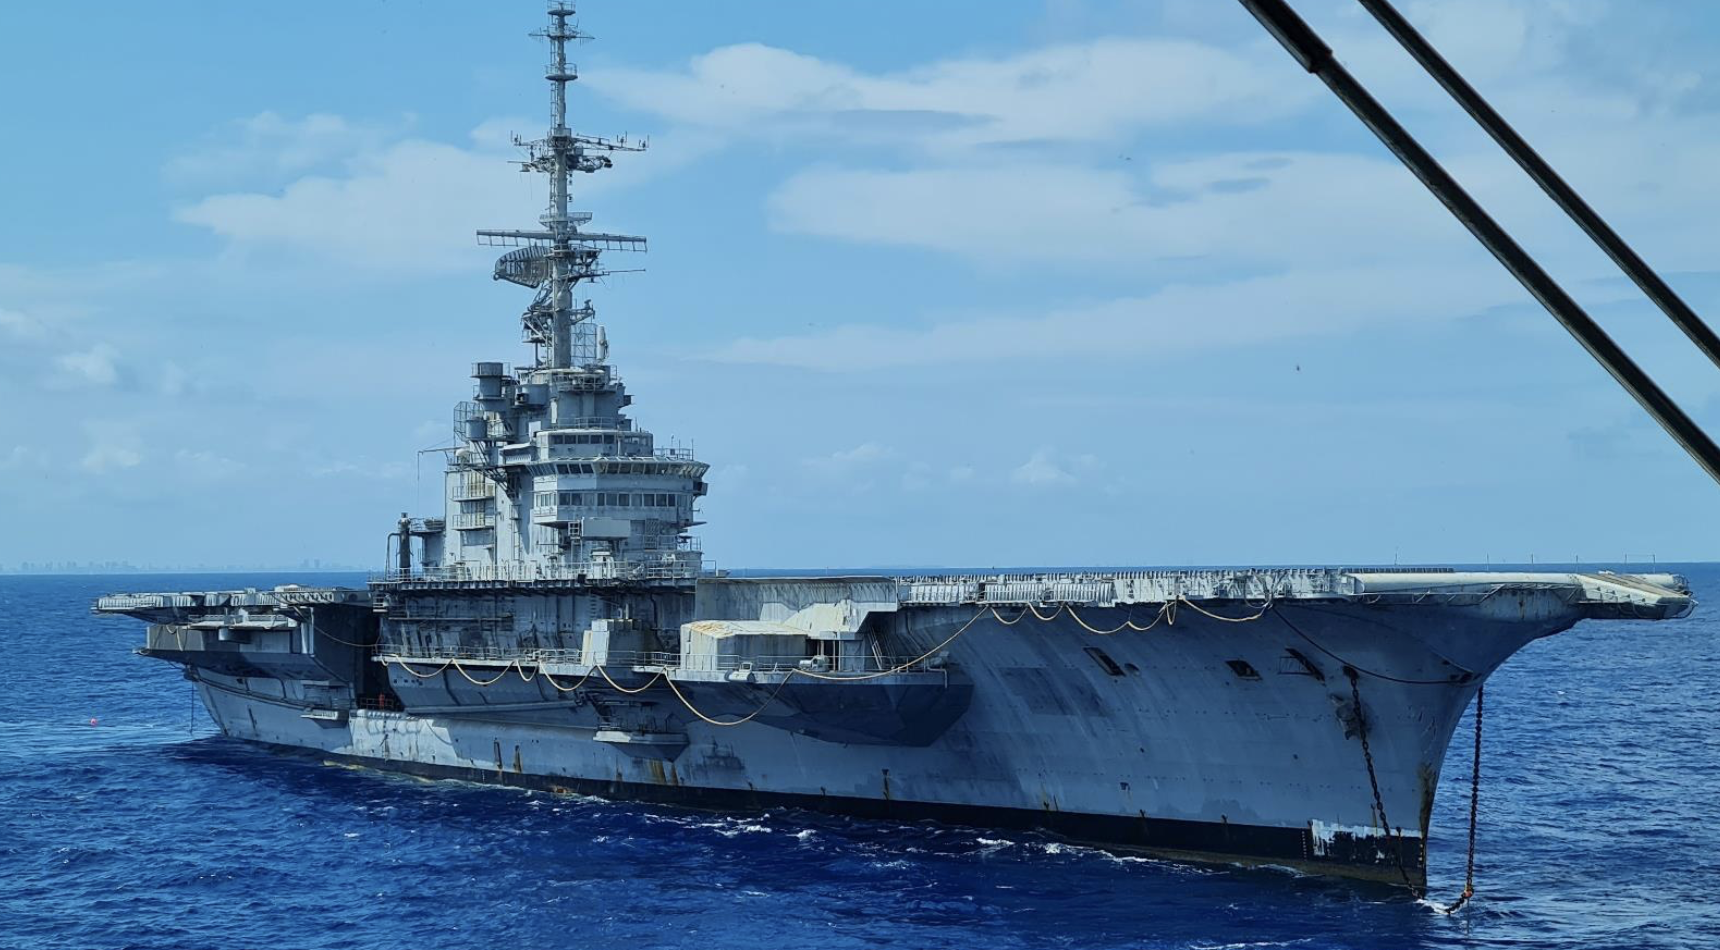 Press Release – Toxic aircraft carrier dangerously drifting after weeks at sea